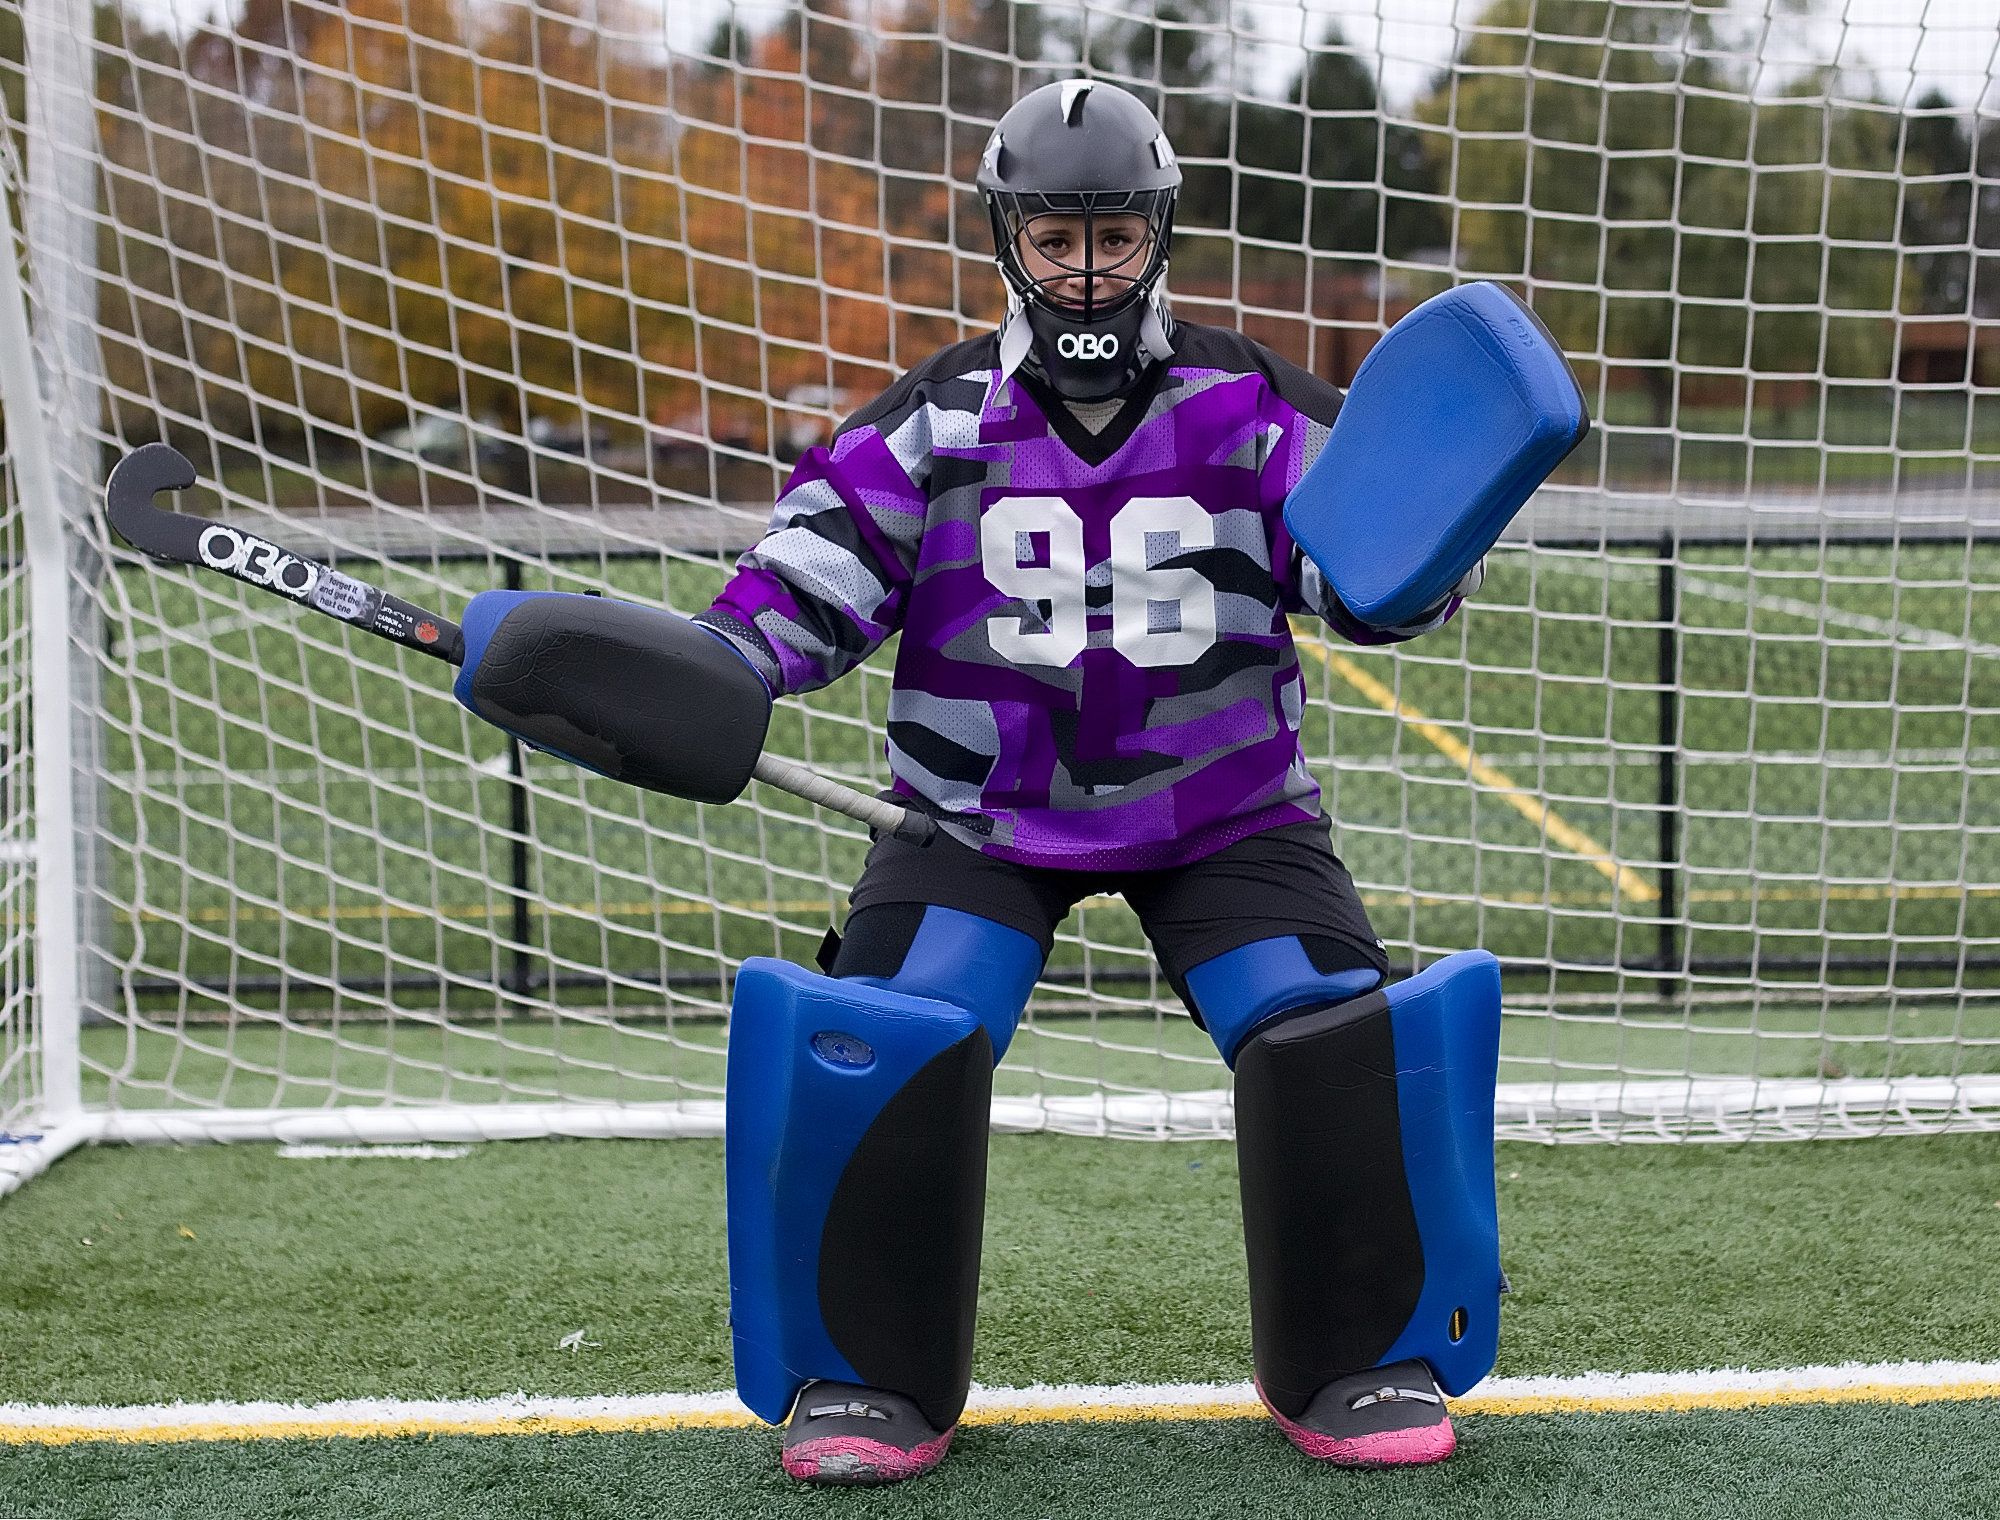 Going Deep: Two local field hockey goalies dominate the competition